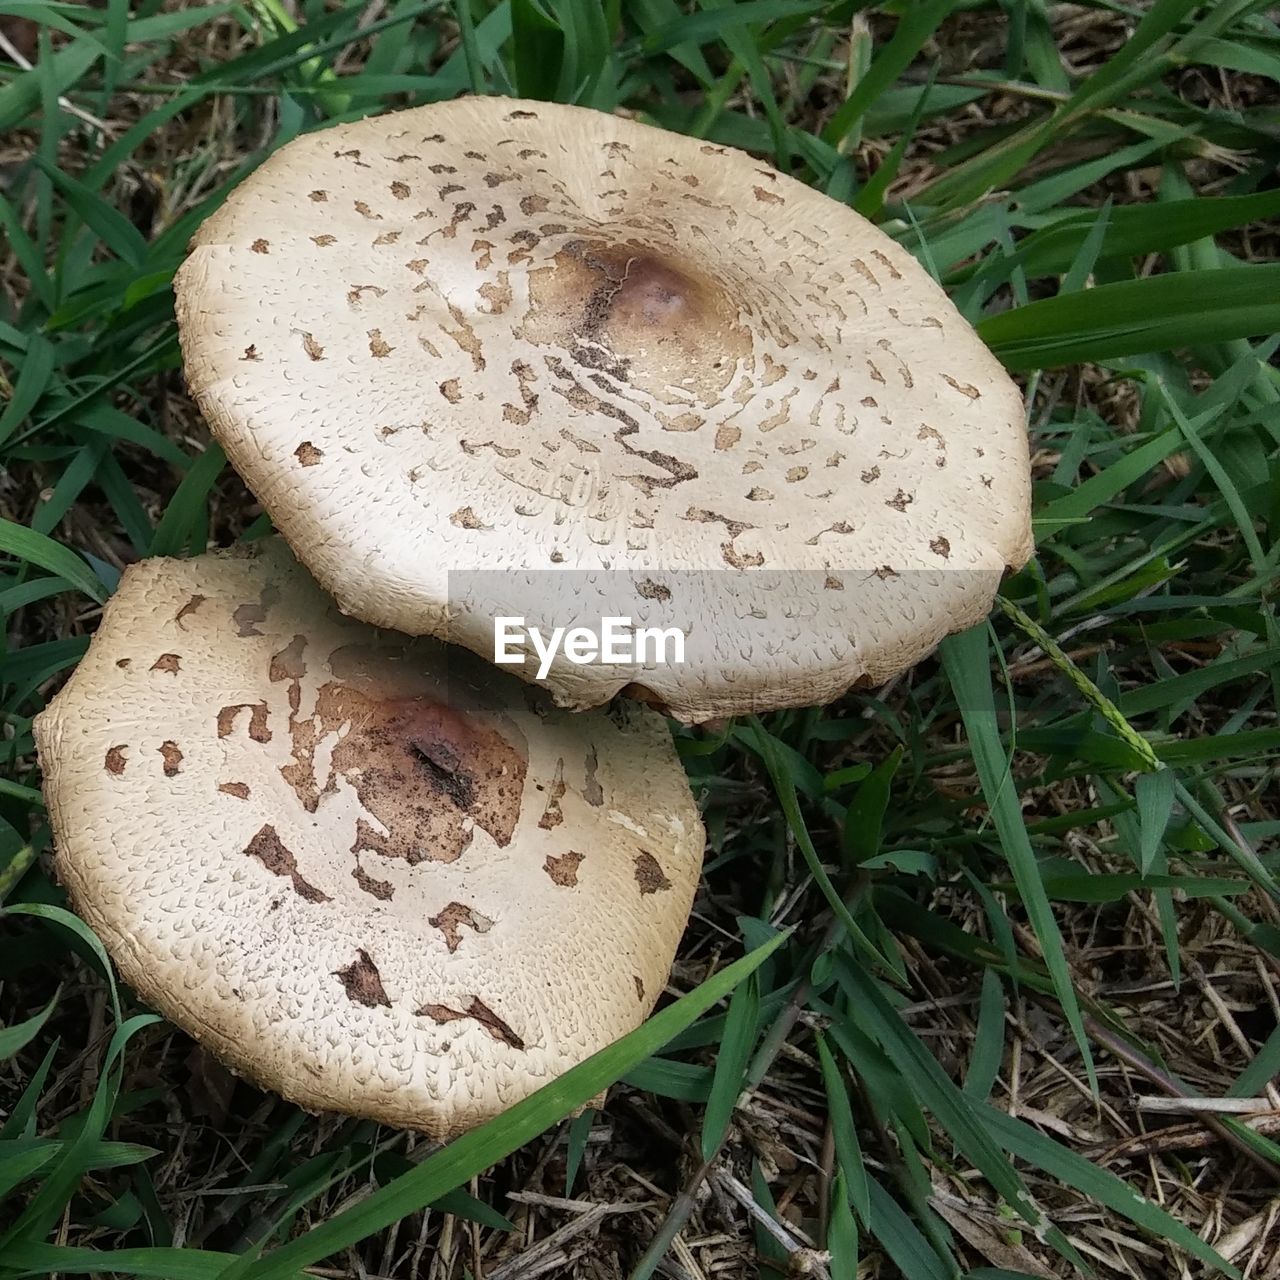 HIGH ANGLE VIEW OF MUSHROOM GROWING IN GRASS